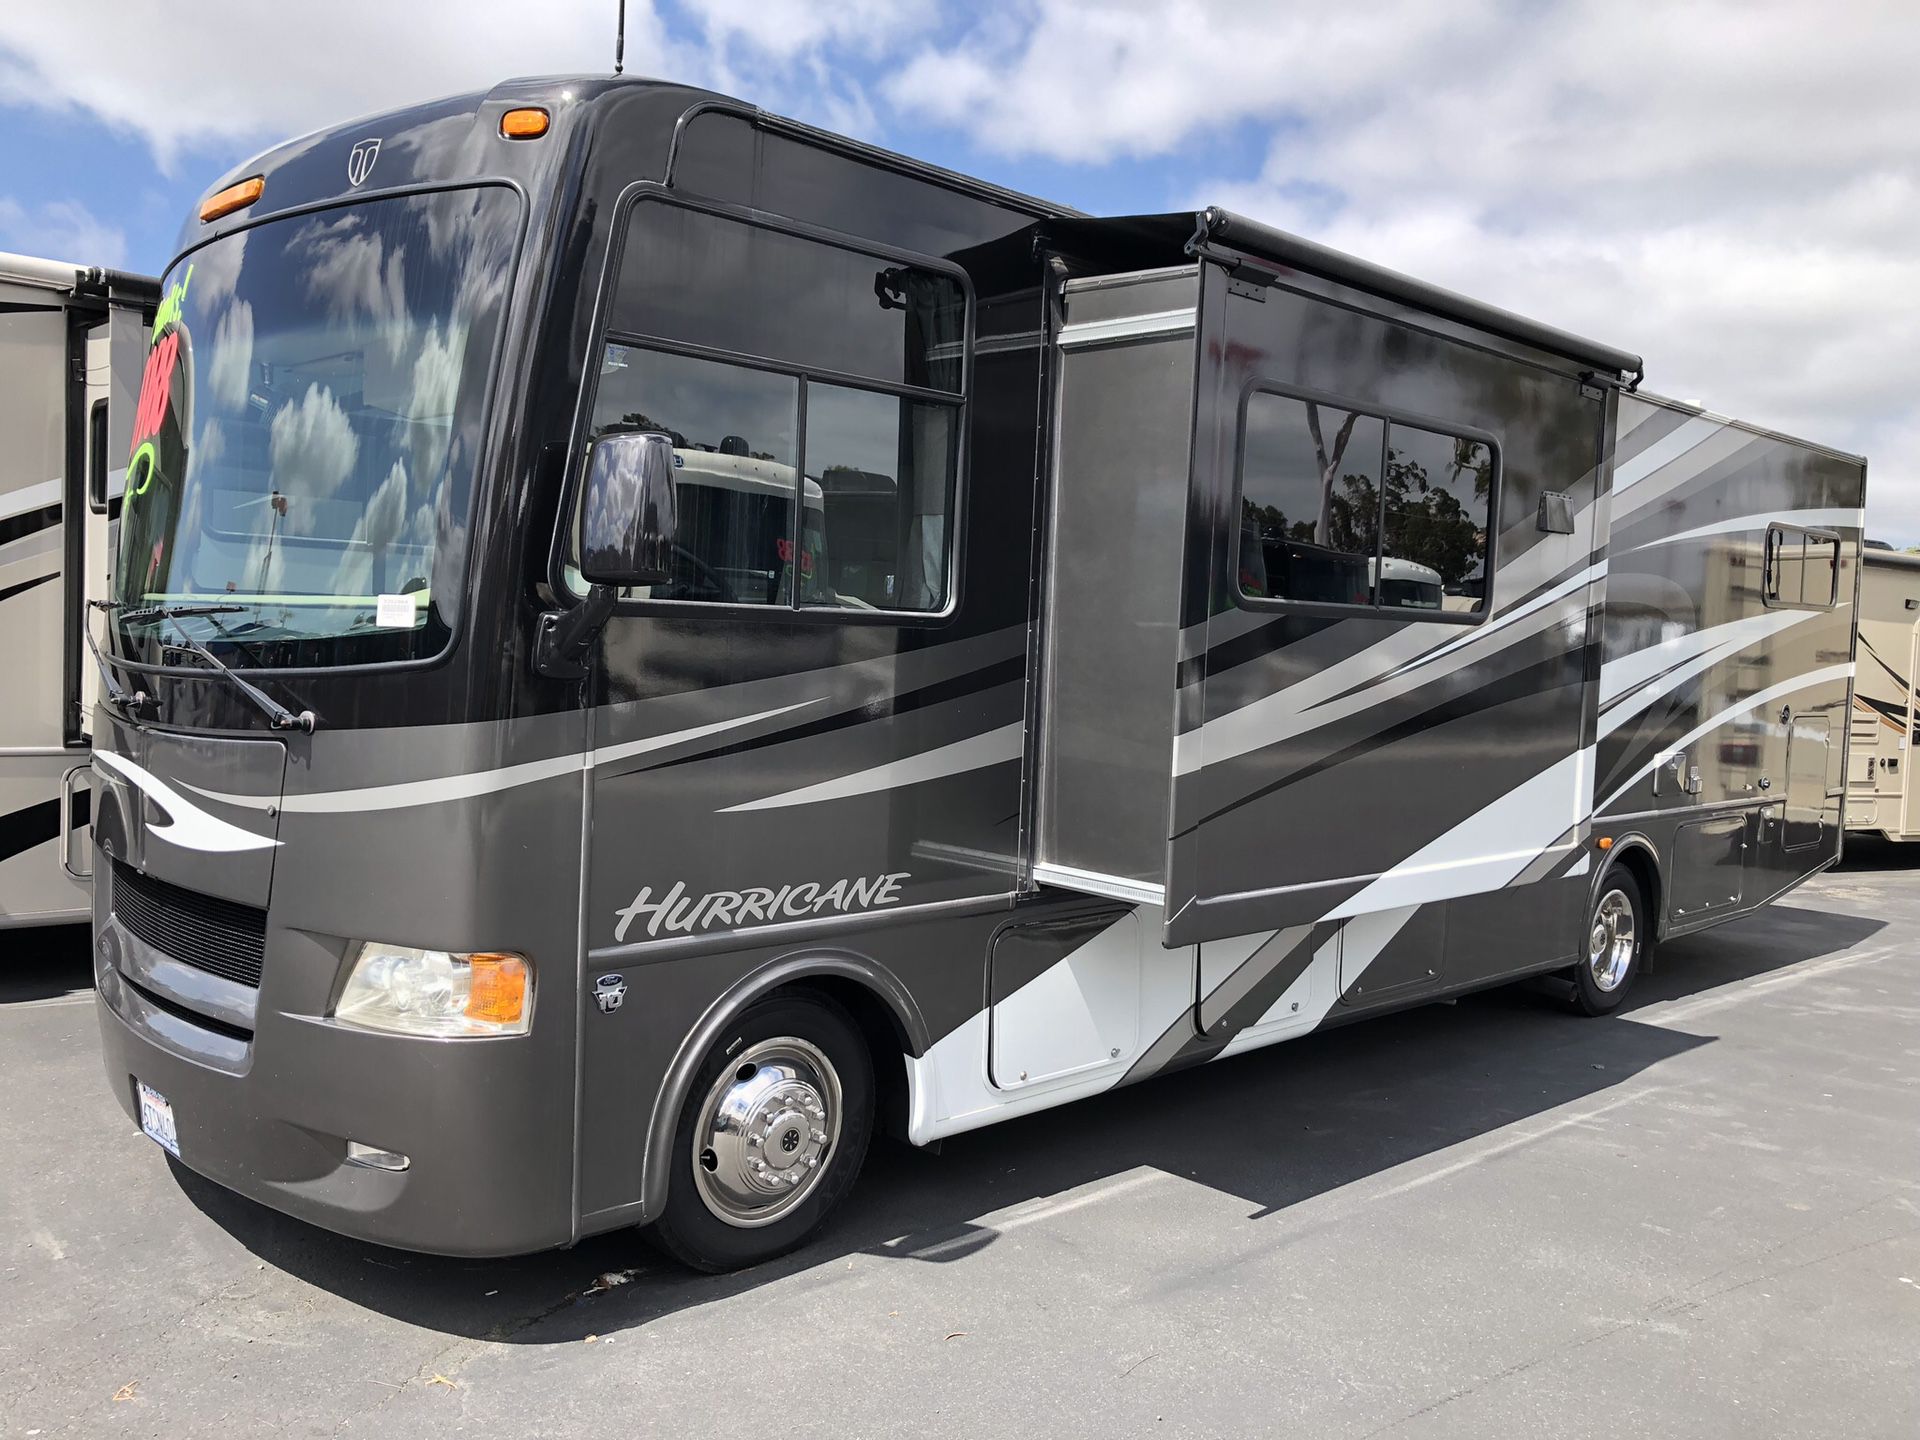 2012 31G Thor Hurricane-Bunk model motorhome with low miles